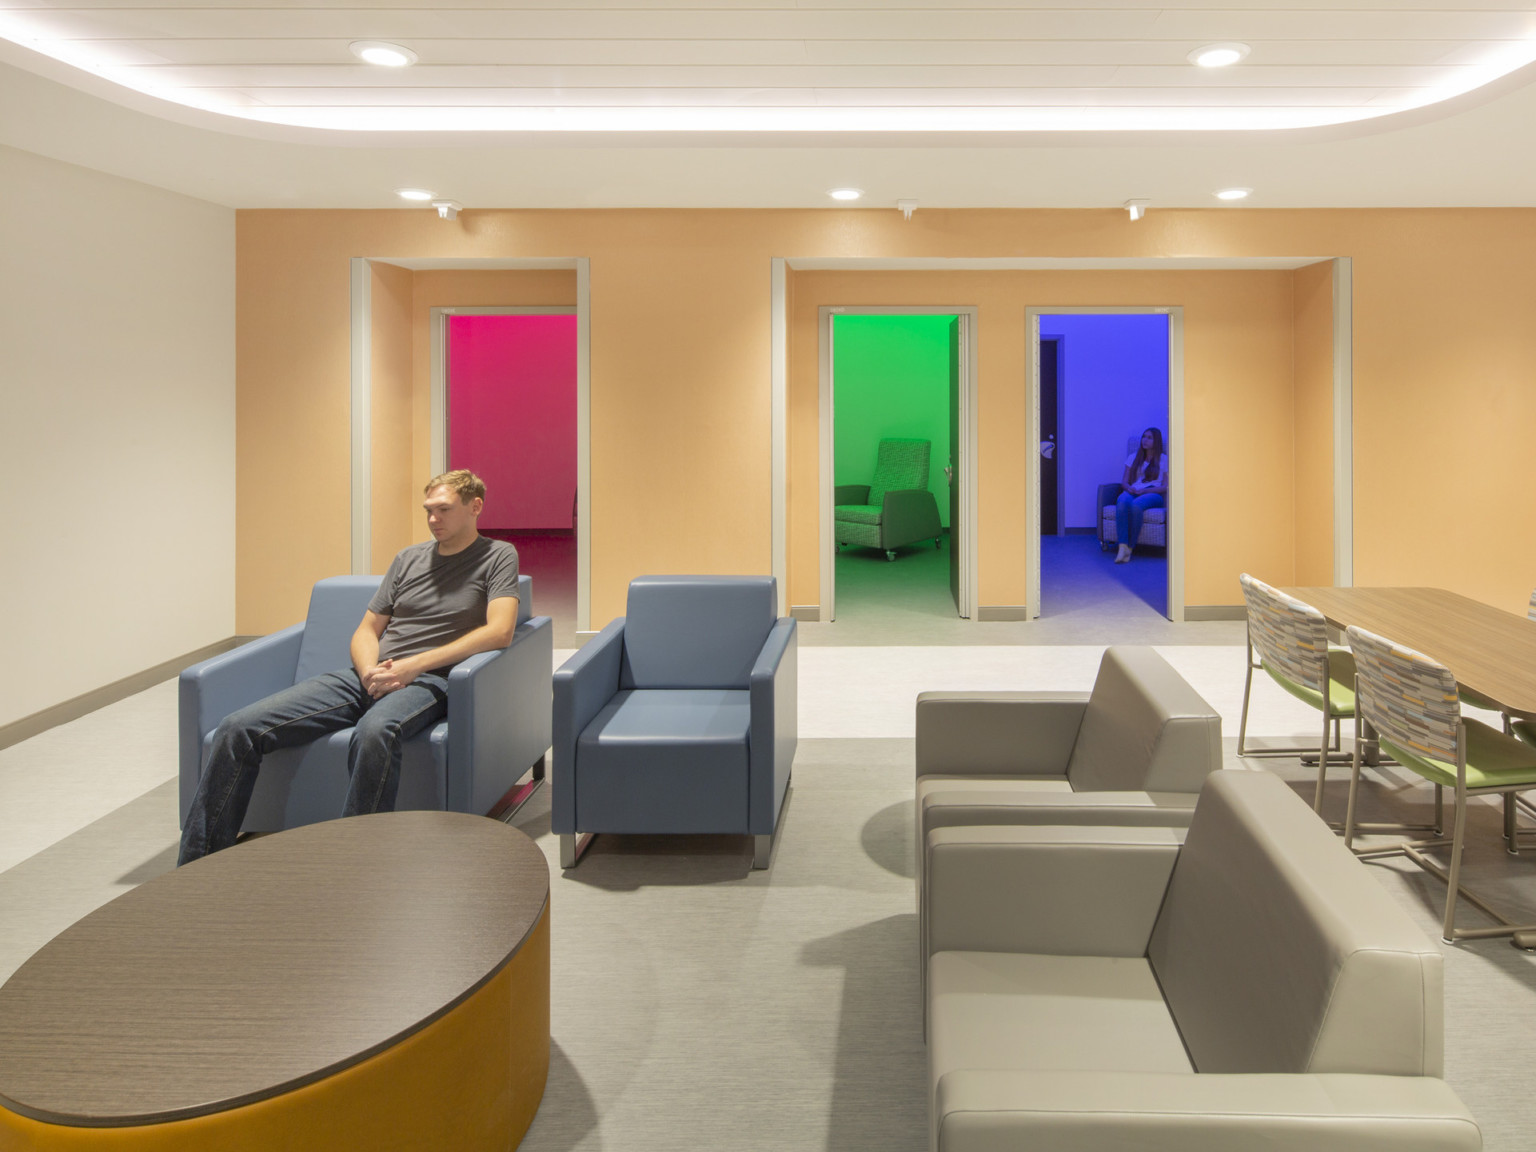 Seating area in front of small recessed rooms with red, green, or blue light. Arm chairs in each room and outside